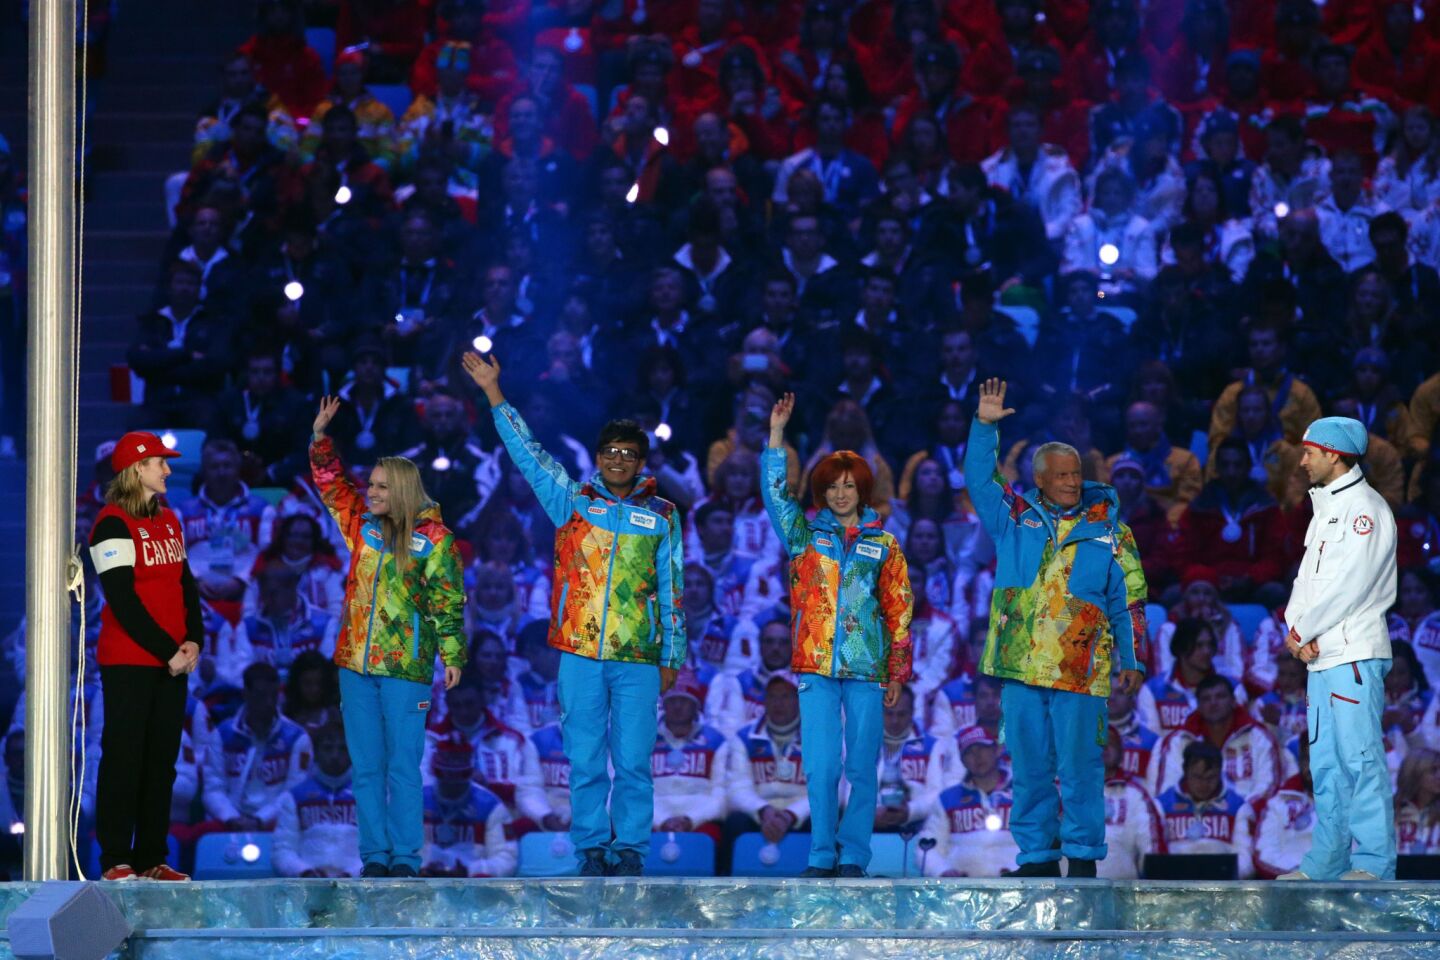 Volunteers are recognized during the 2014 Sochi Winter Olympics Closing Ceremony.